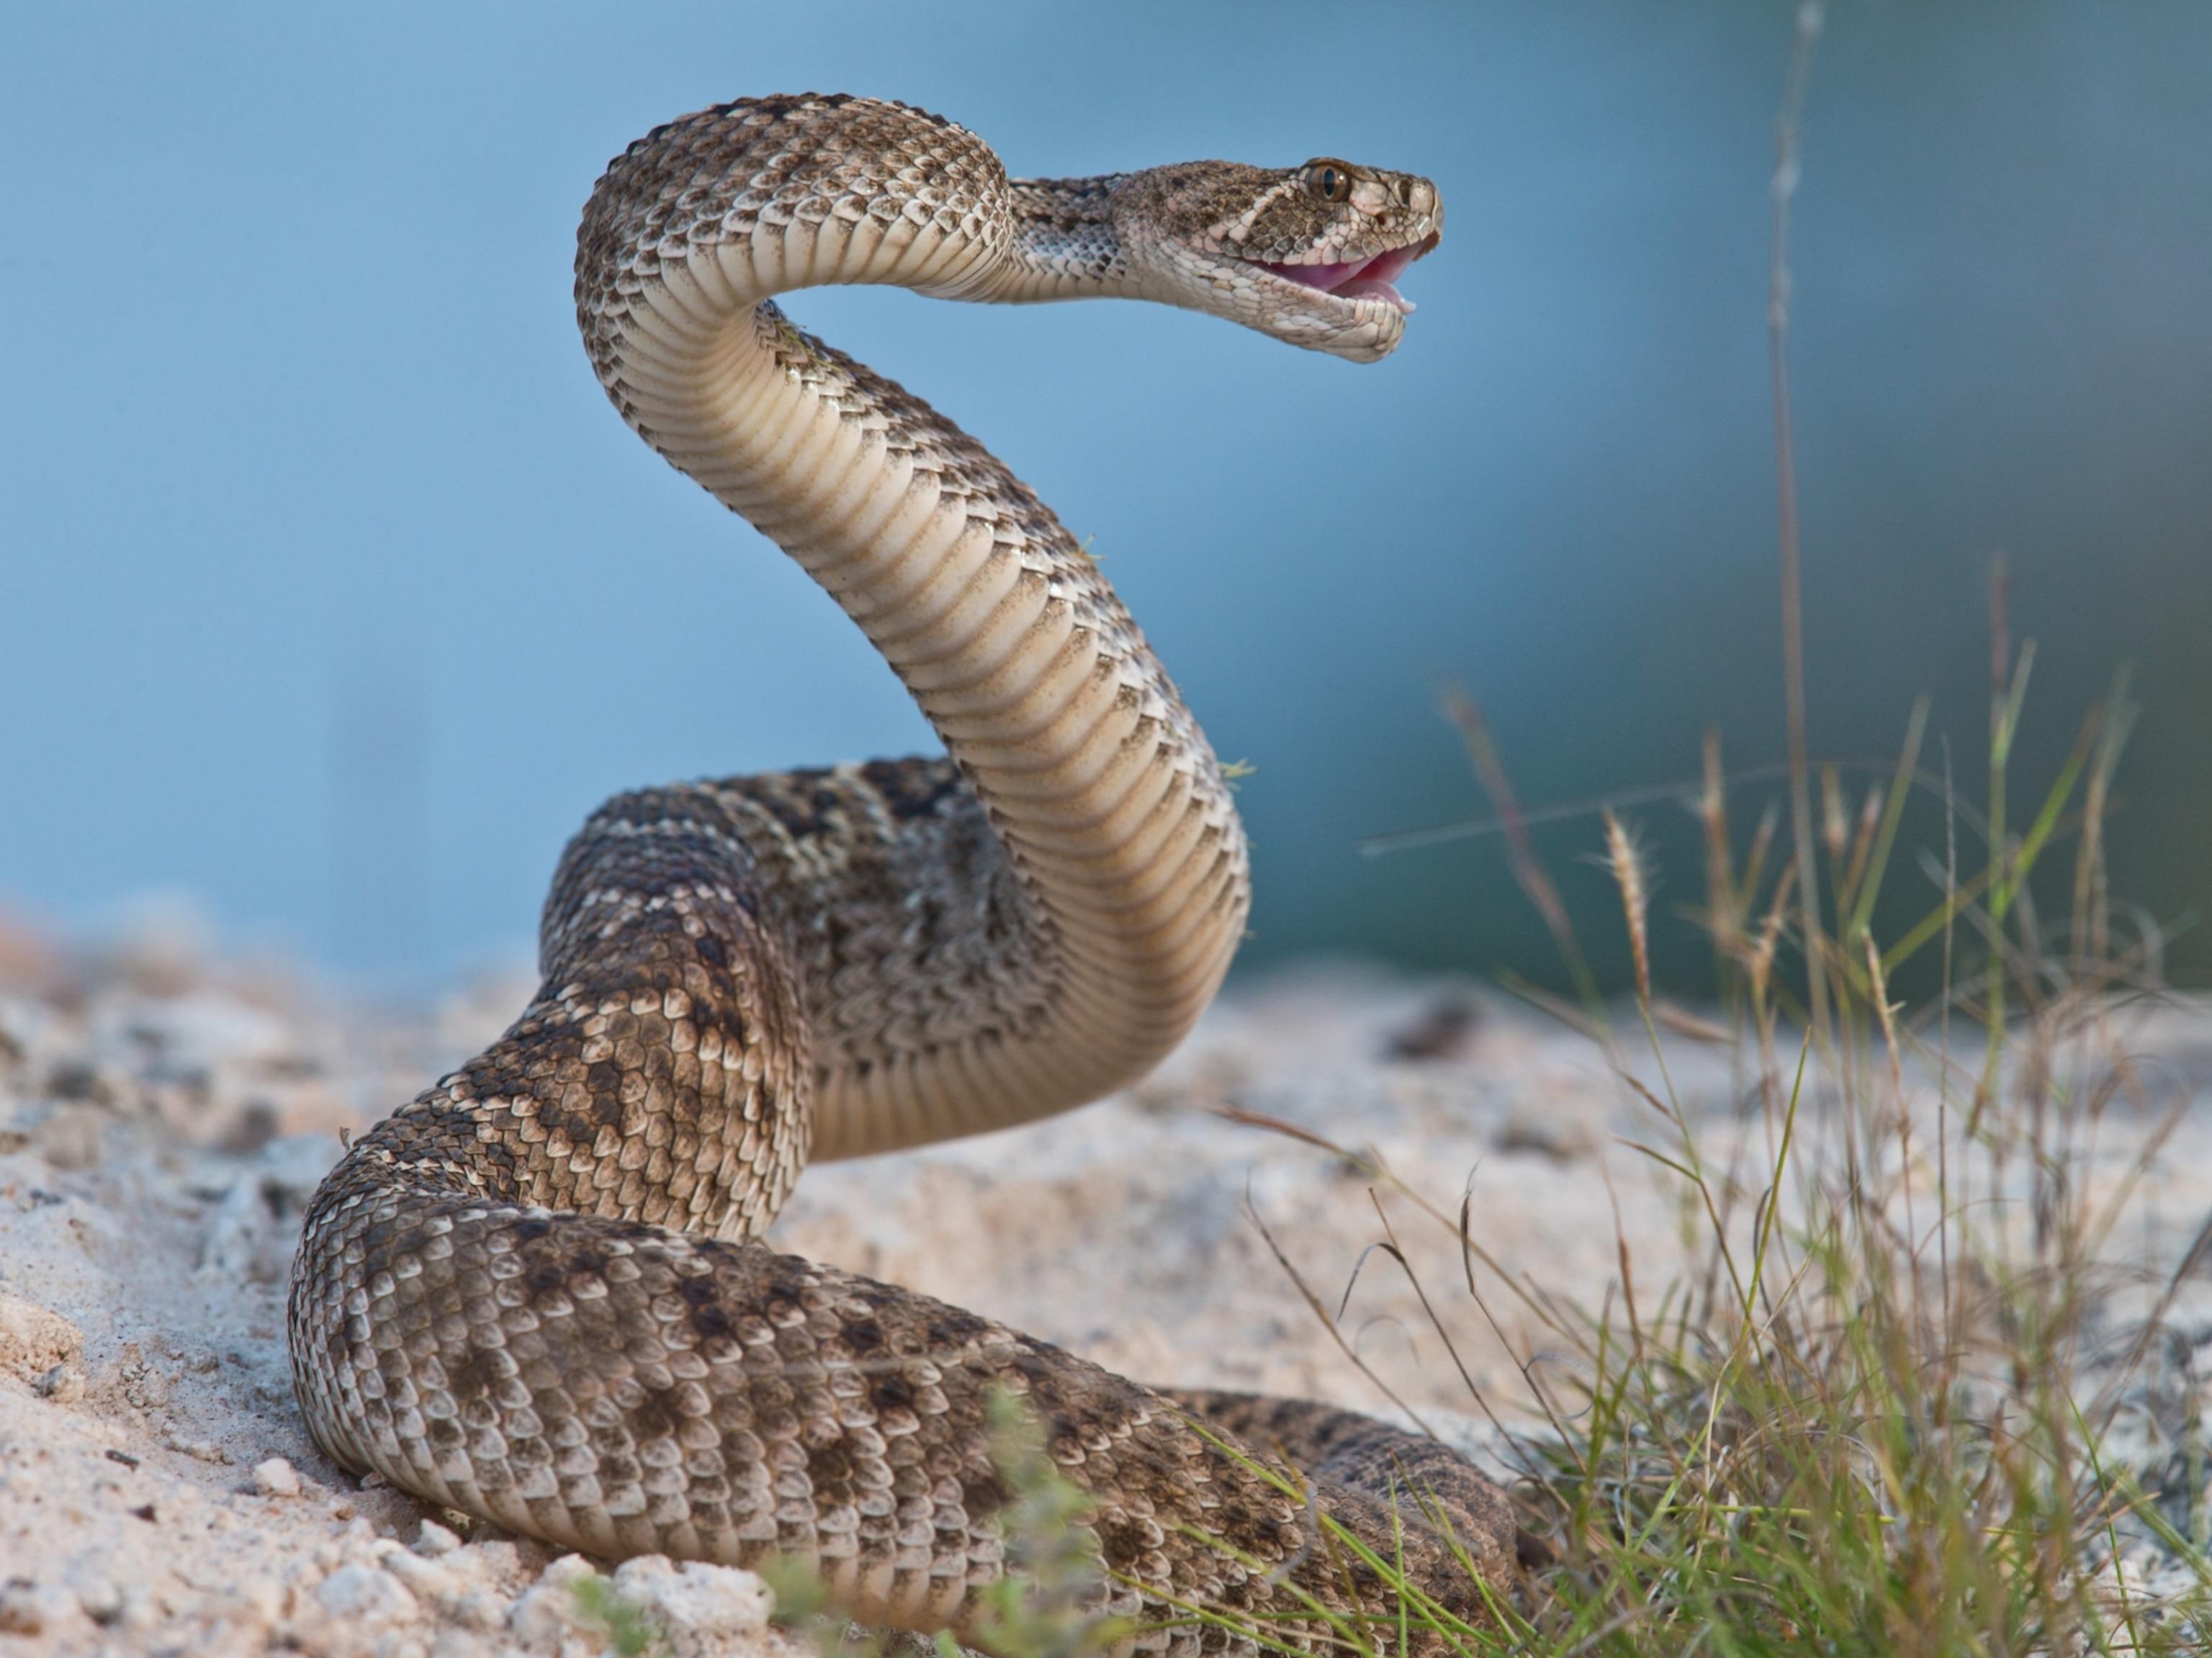 Rattlesnakes trick humans into thinking theyre closer than they are